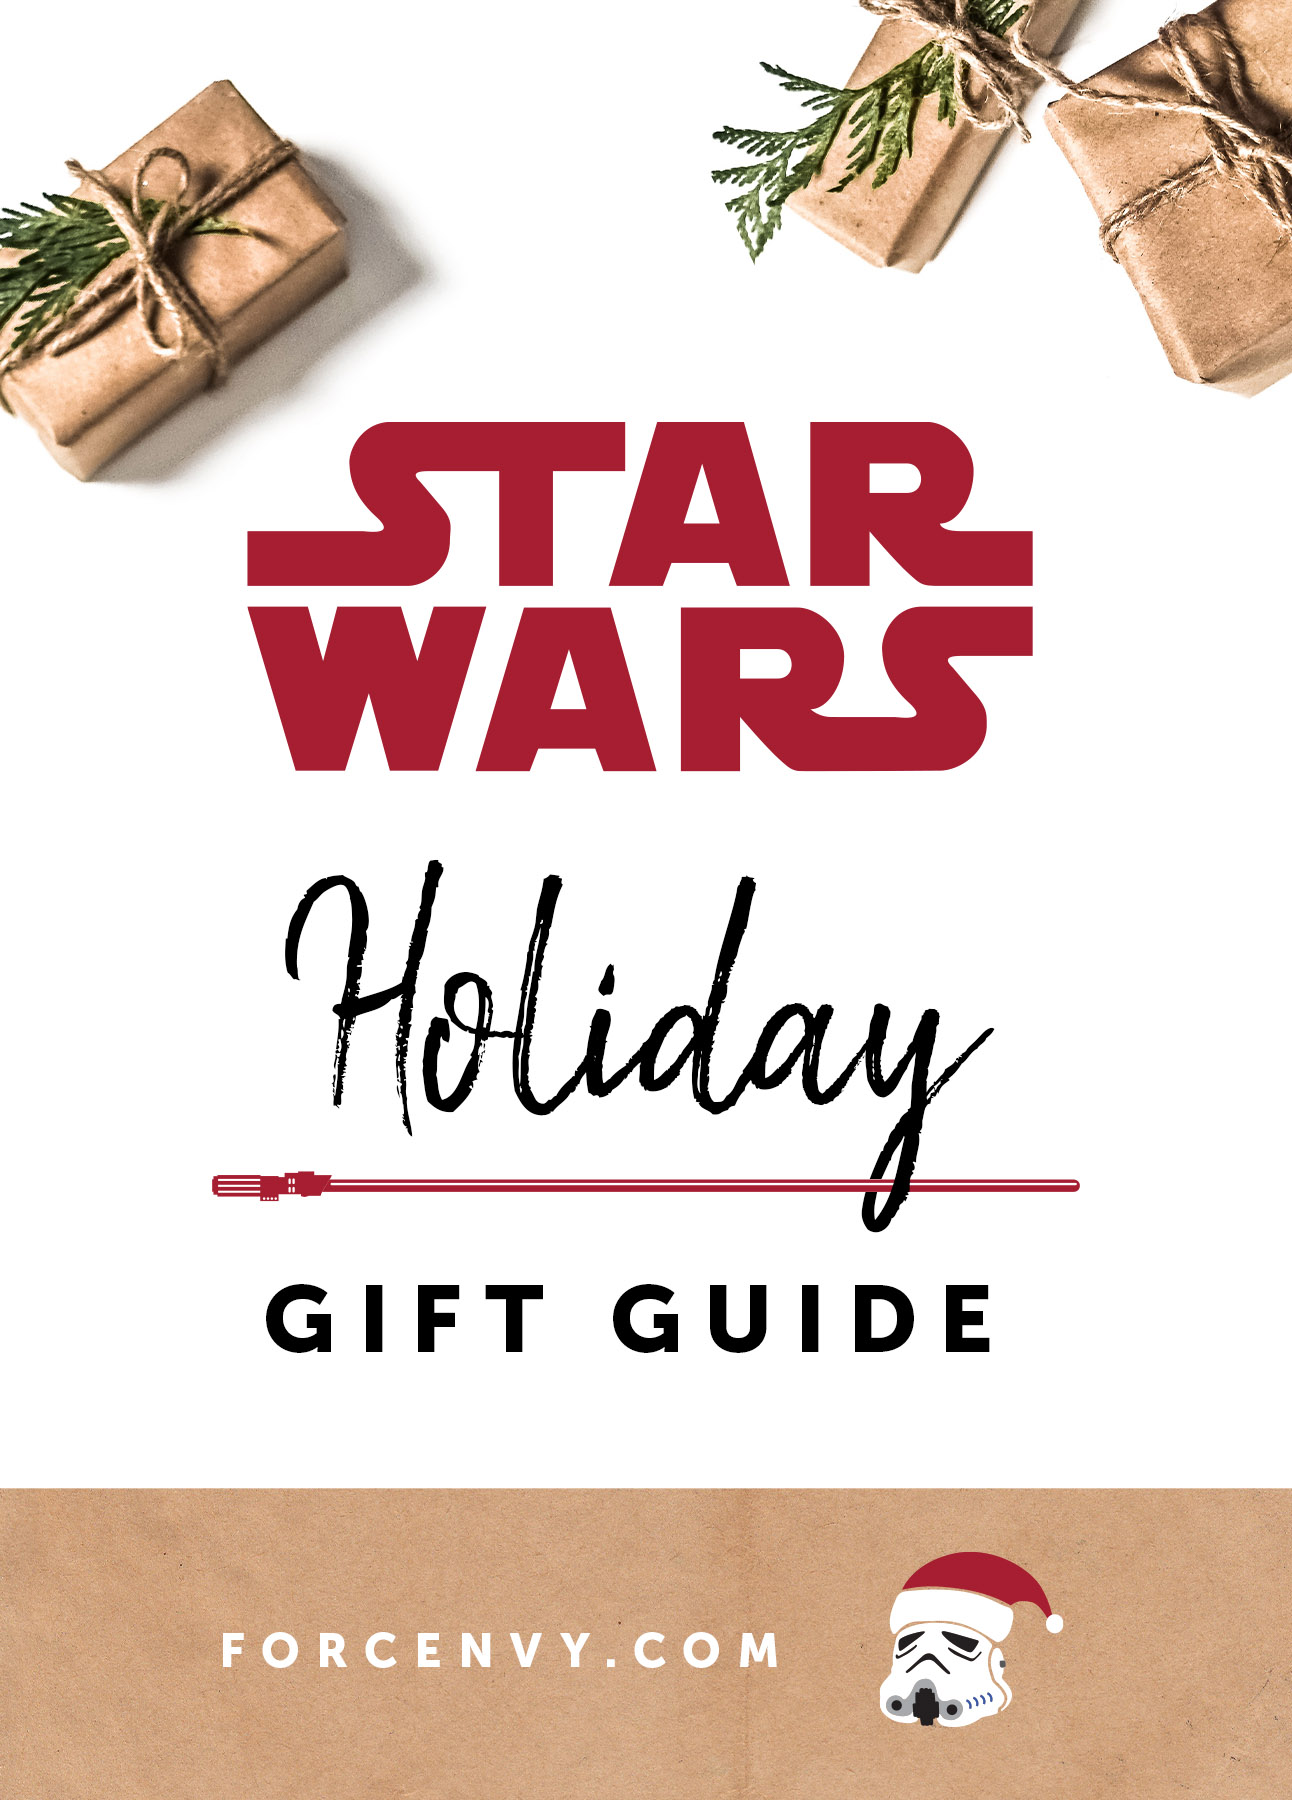 Star Wars Holiday Gift Guide